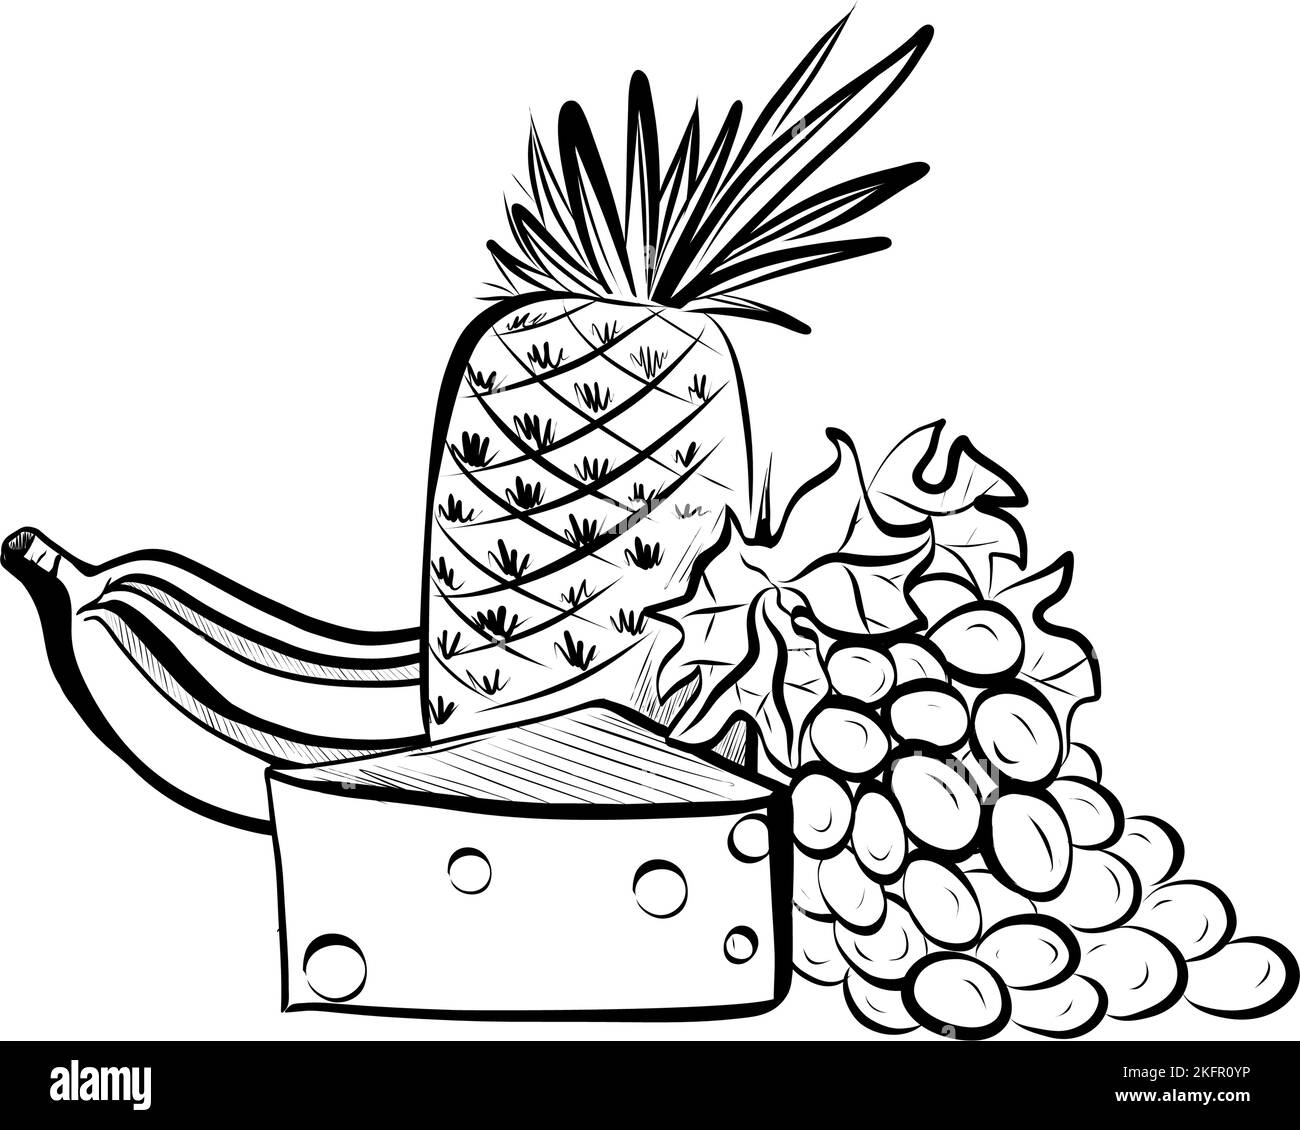 Sketch Illustration of Banana Pineapple Cheese and Grapes. Hand Drawn Icon on White Background Stock Vector